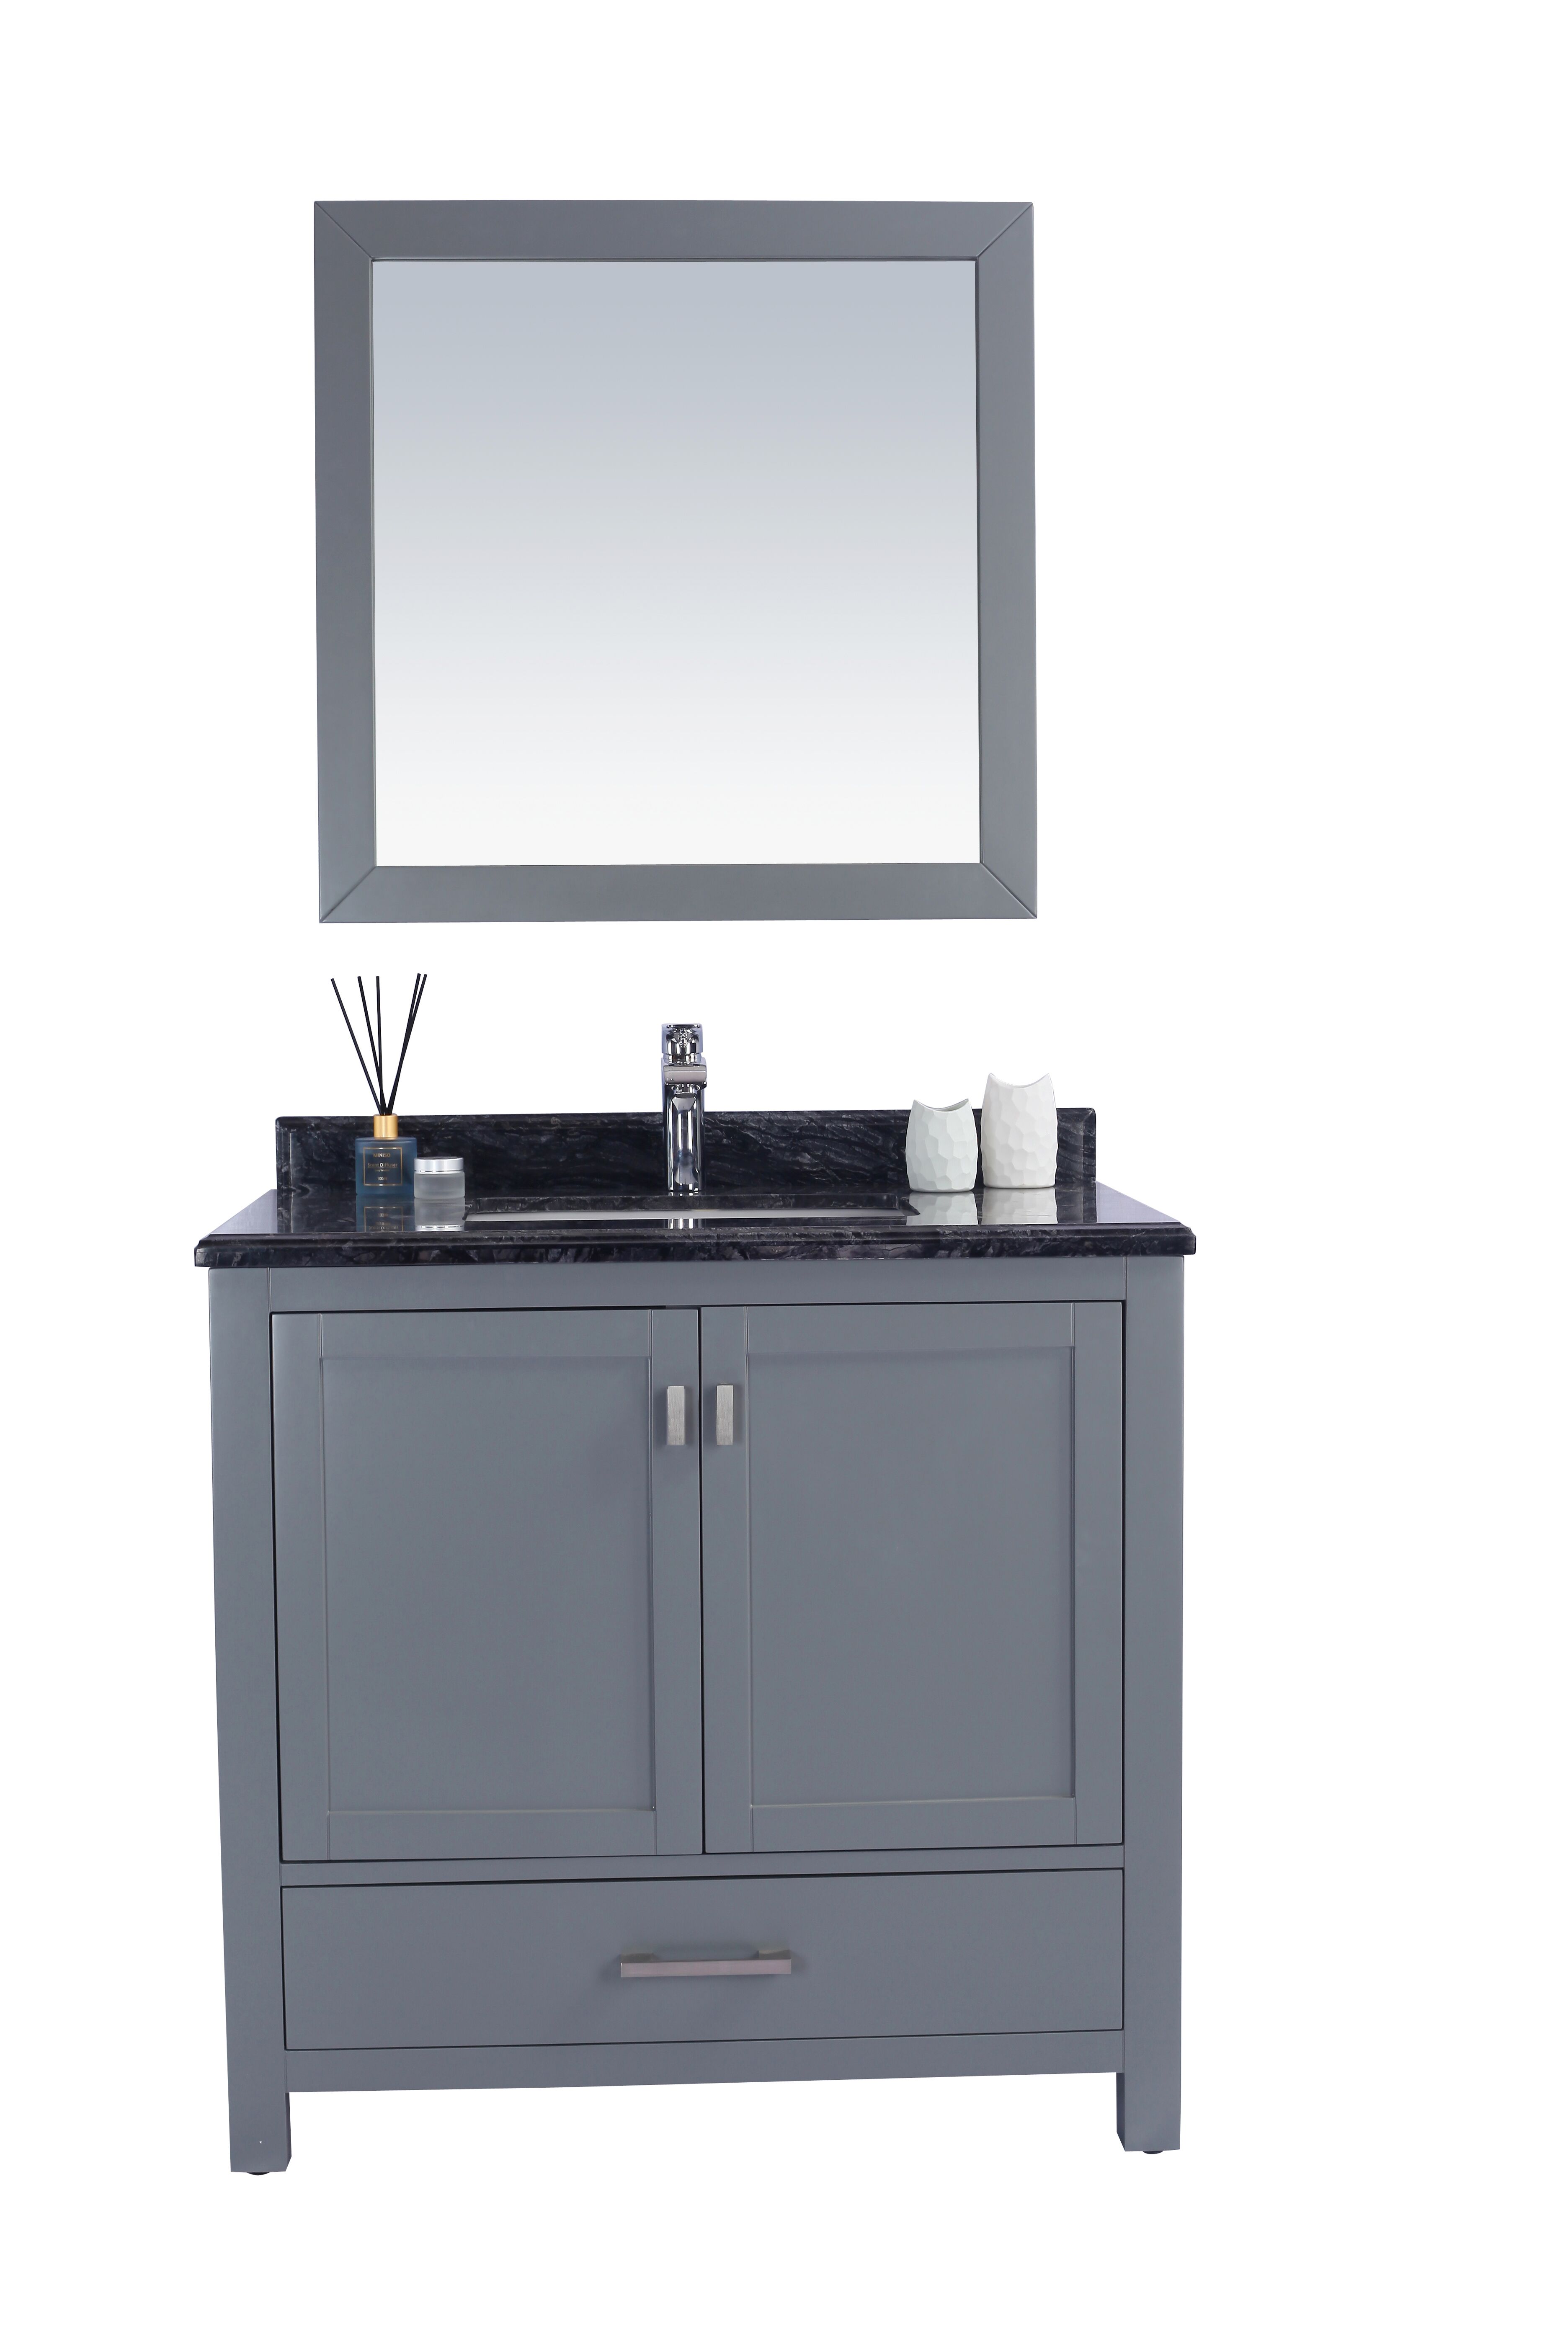 36" Single Sink Bathroom Vanity Cabinet + Top and Color Options